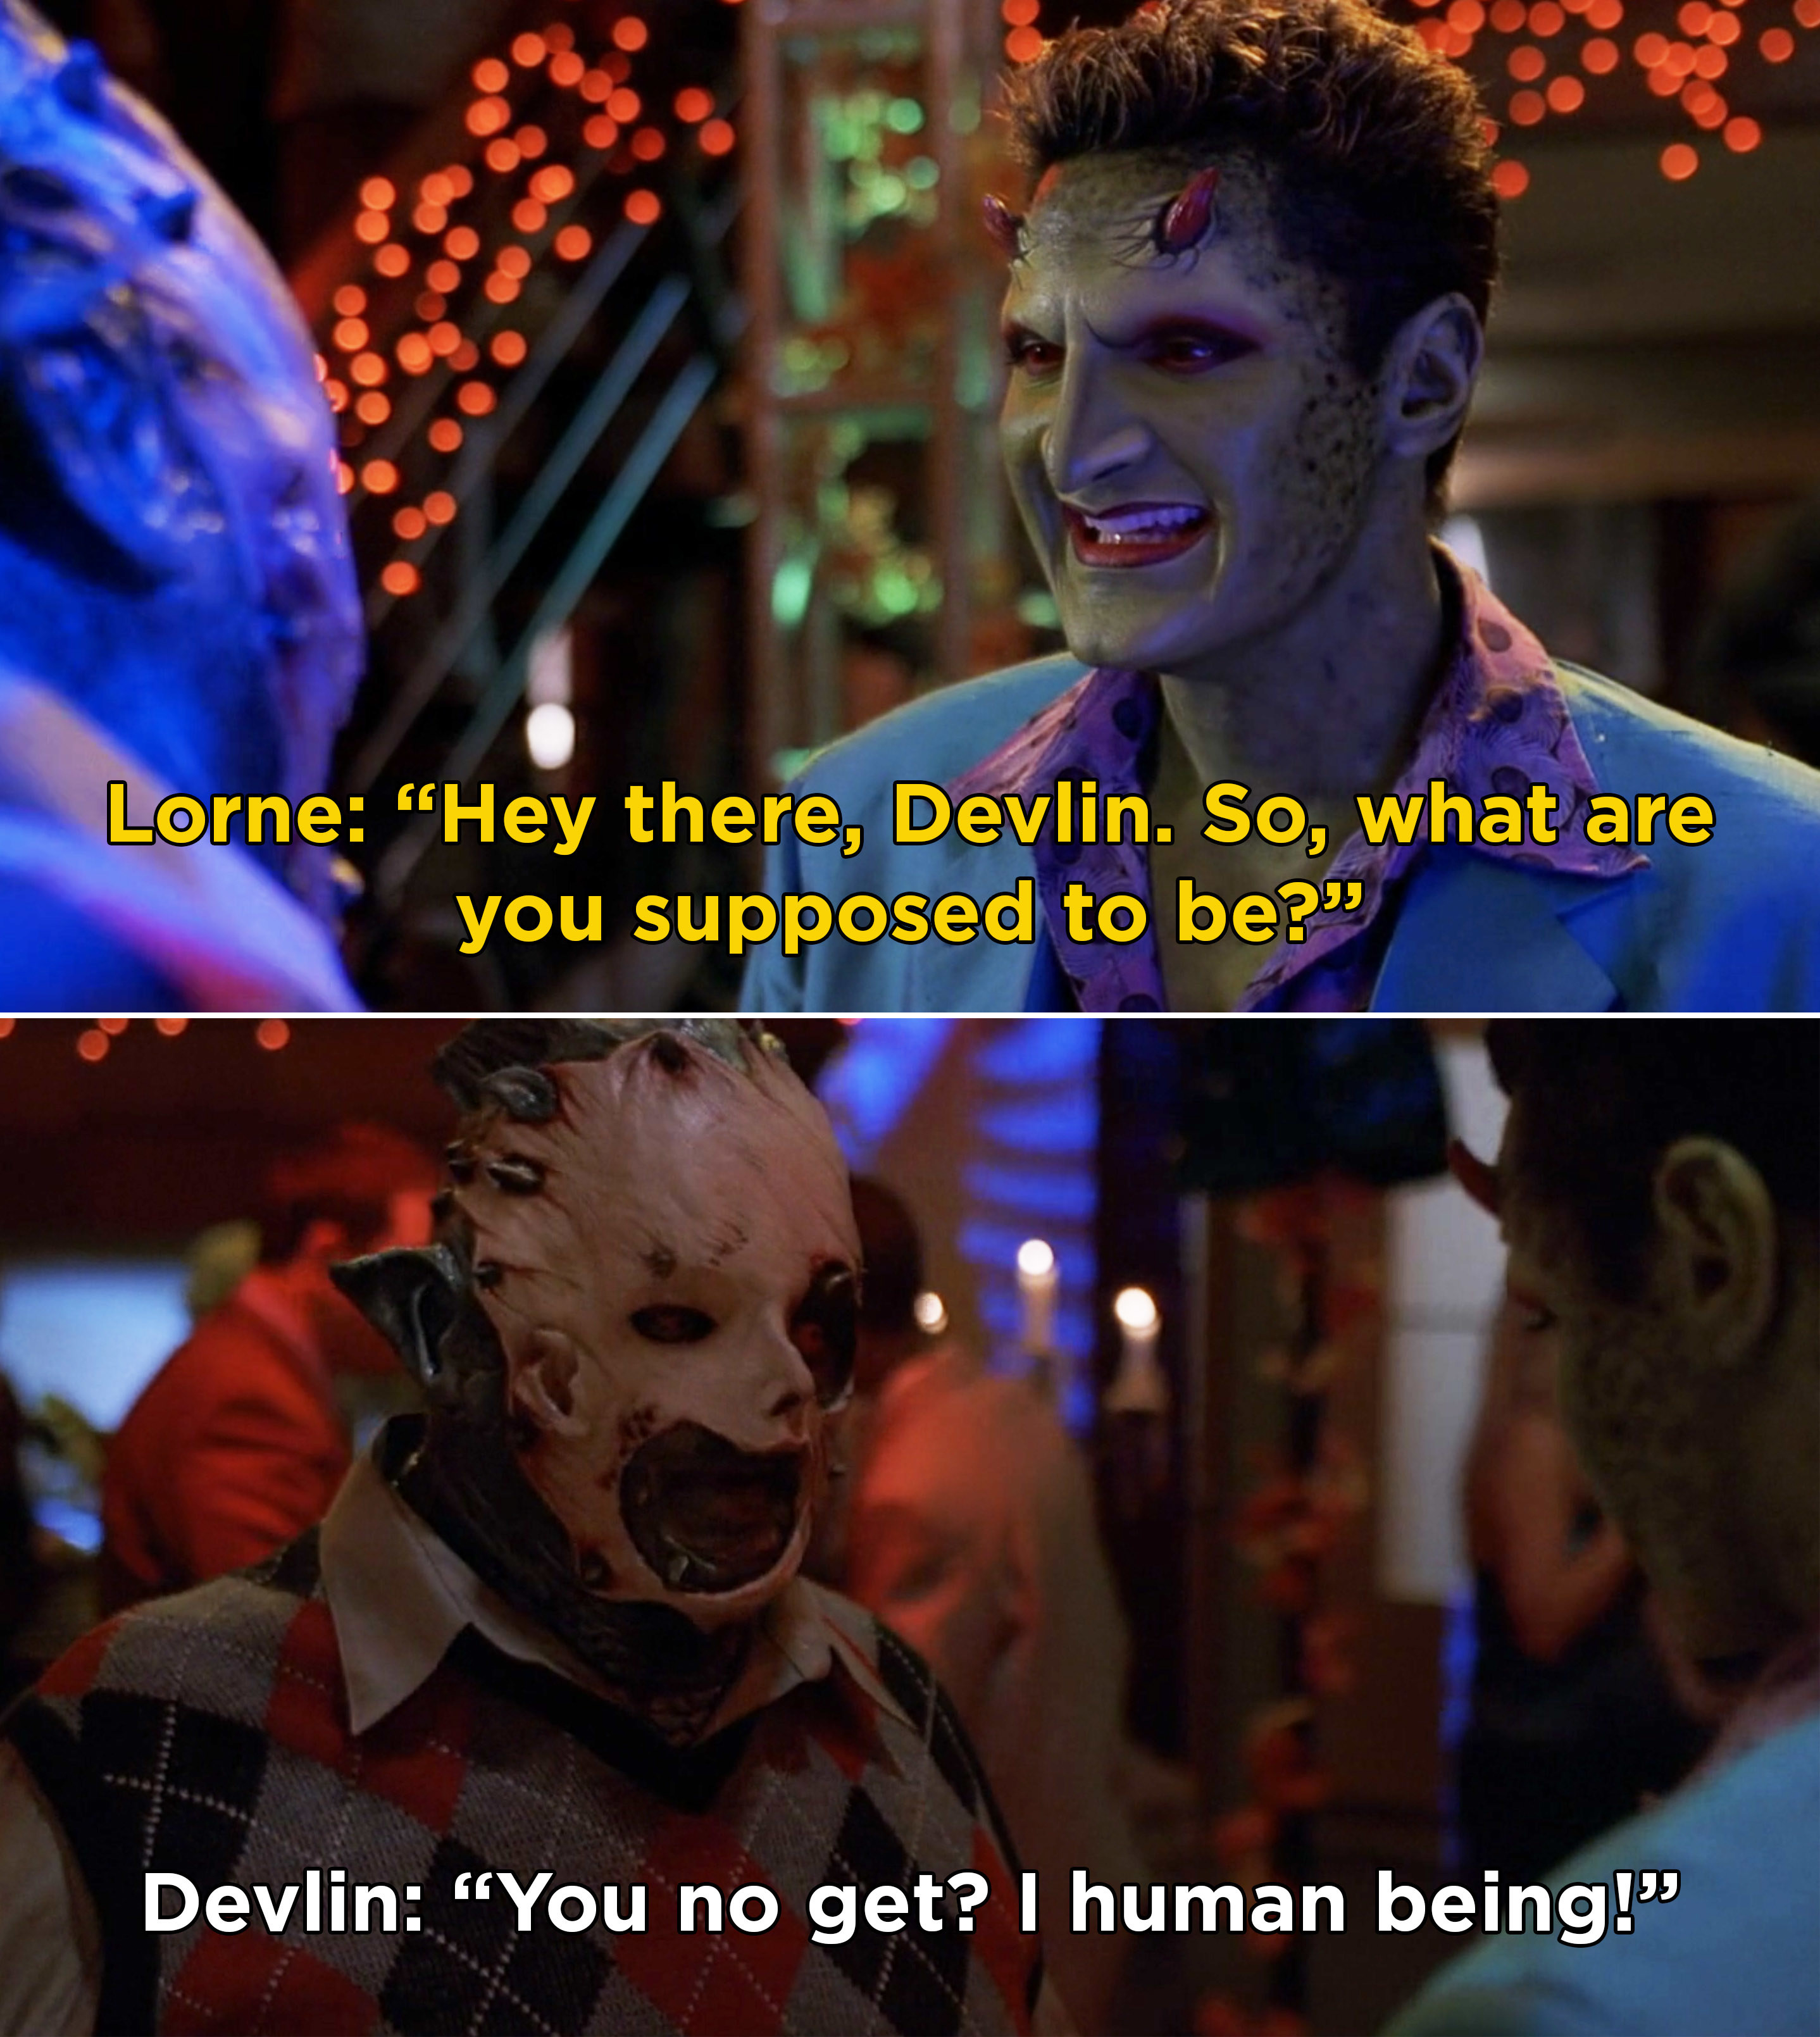 Devlin telling Lorne that he&#x27;s dressed as a human being for Halloween